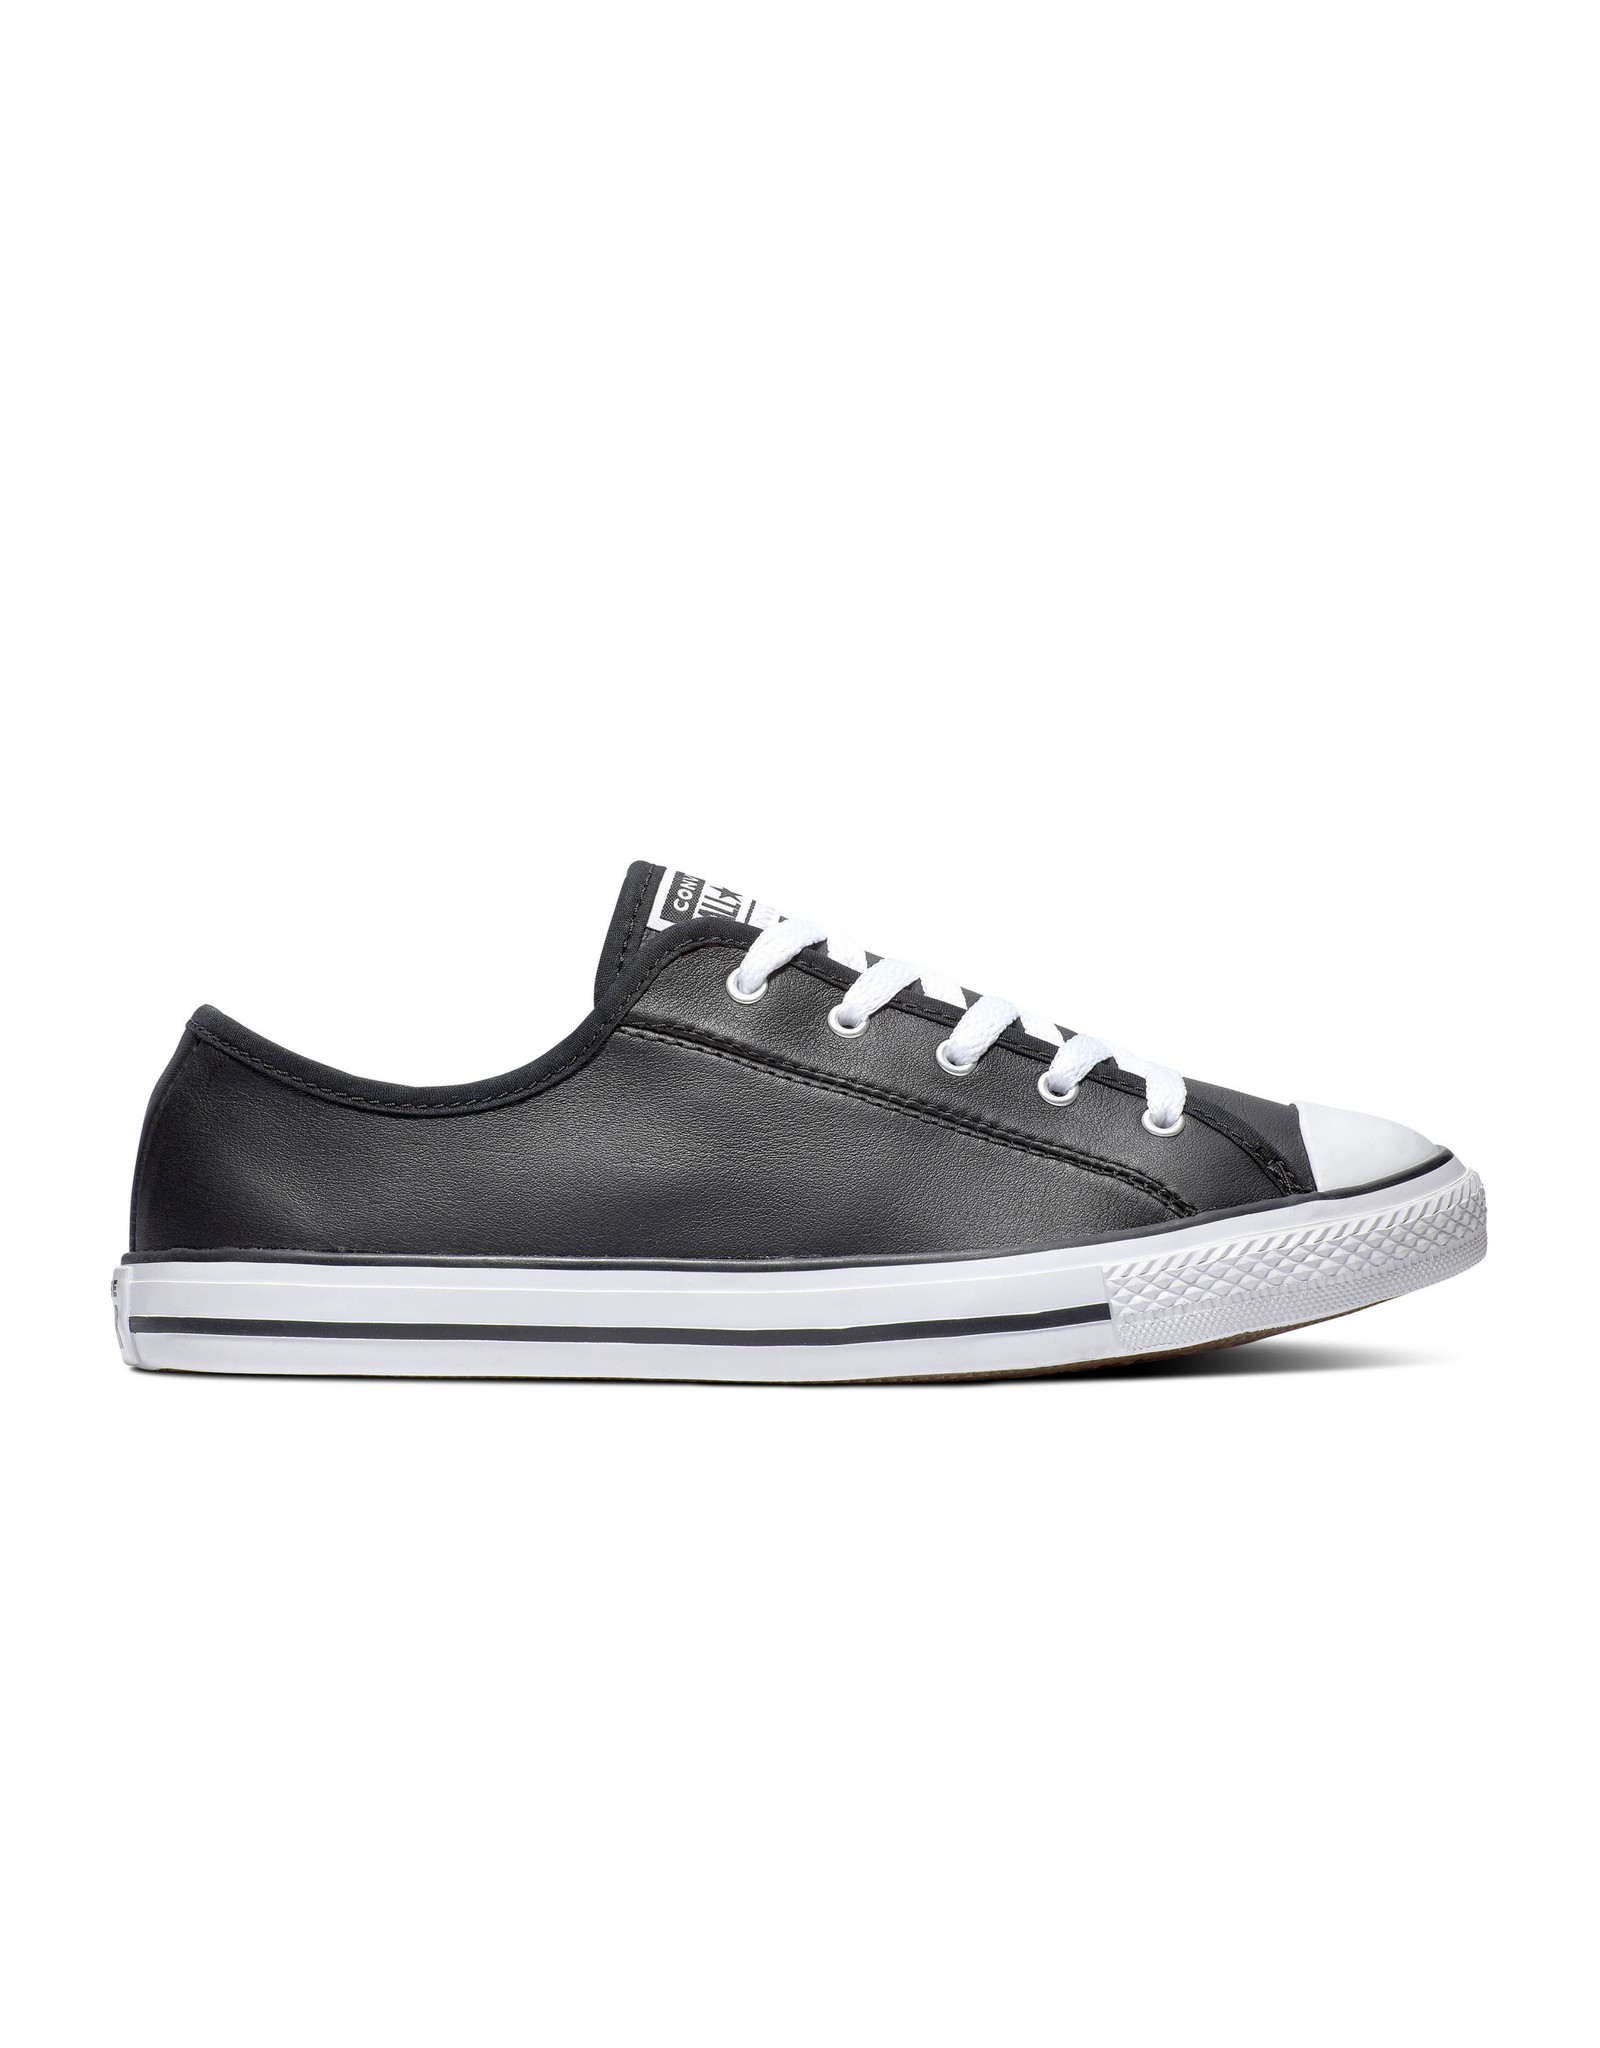 converse chuck taylor all star dainty leather ox